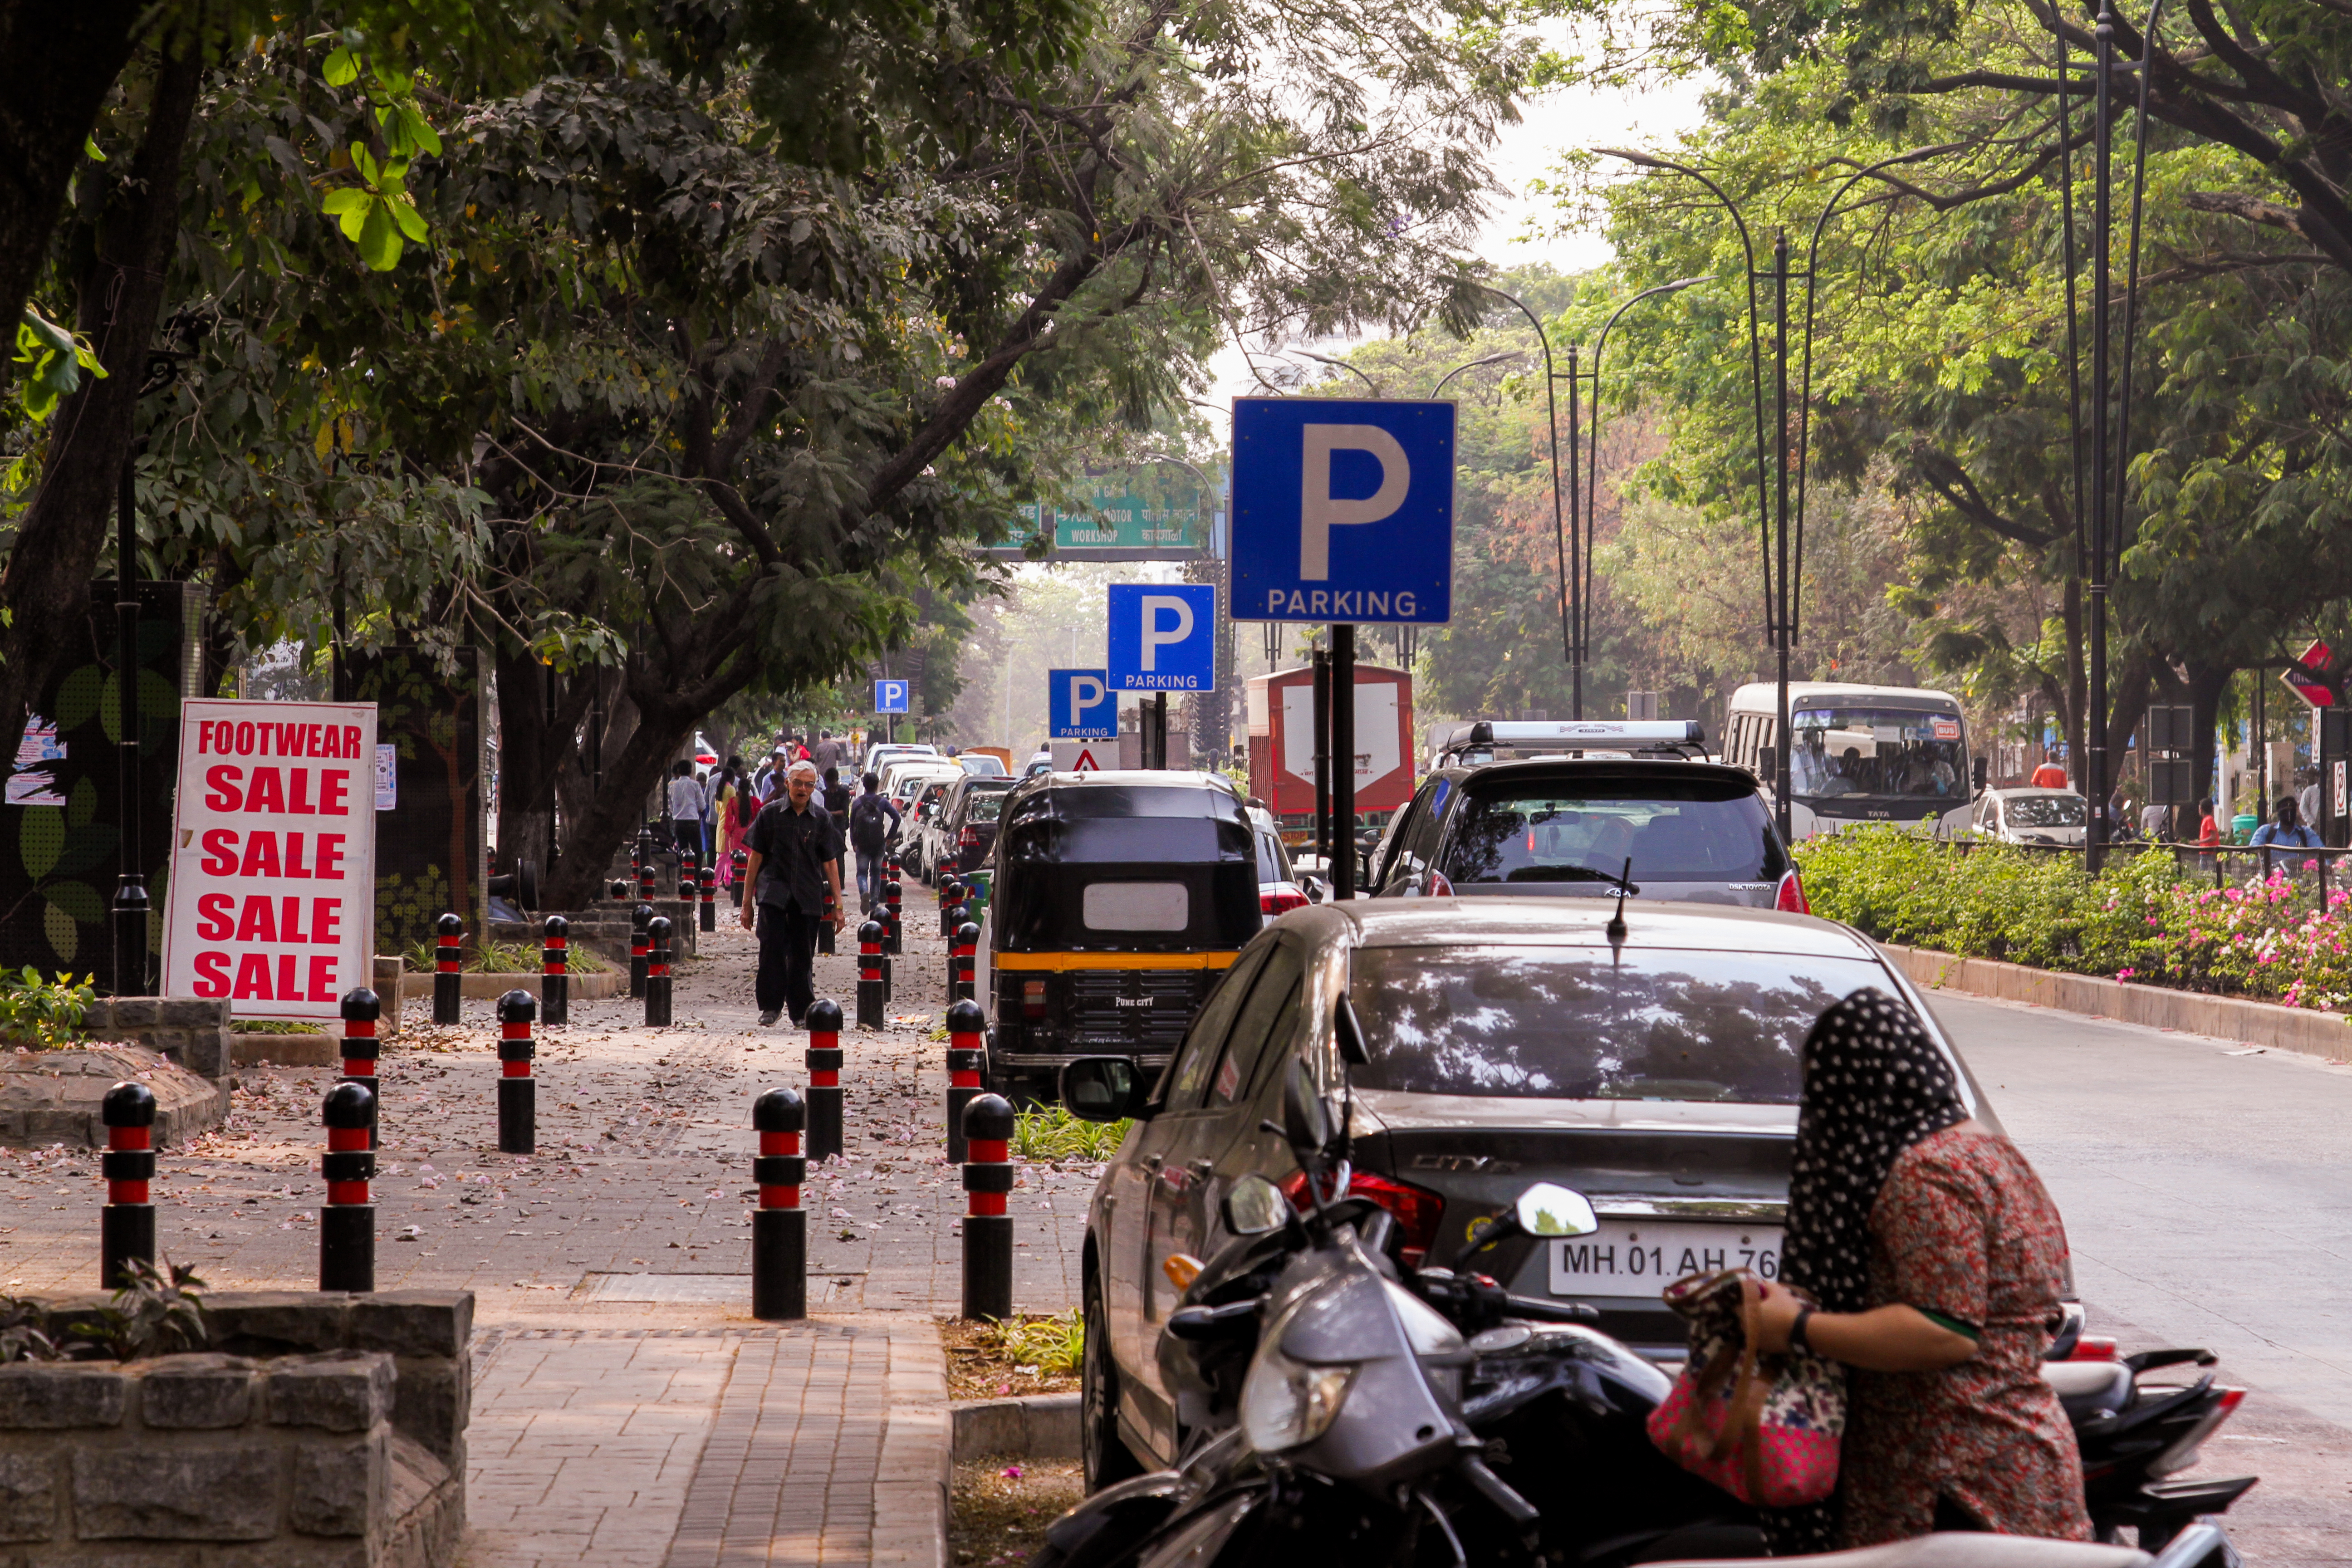 The policy proposes clearly demarcating legal and restricted parking spaces